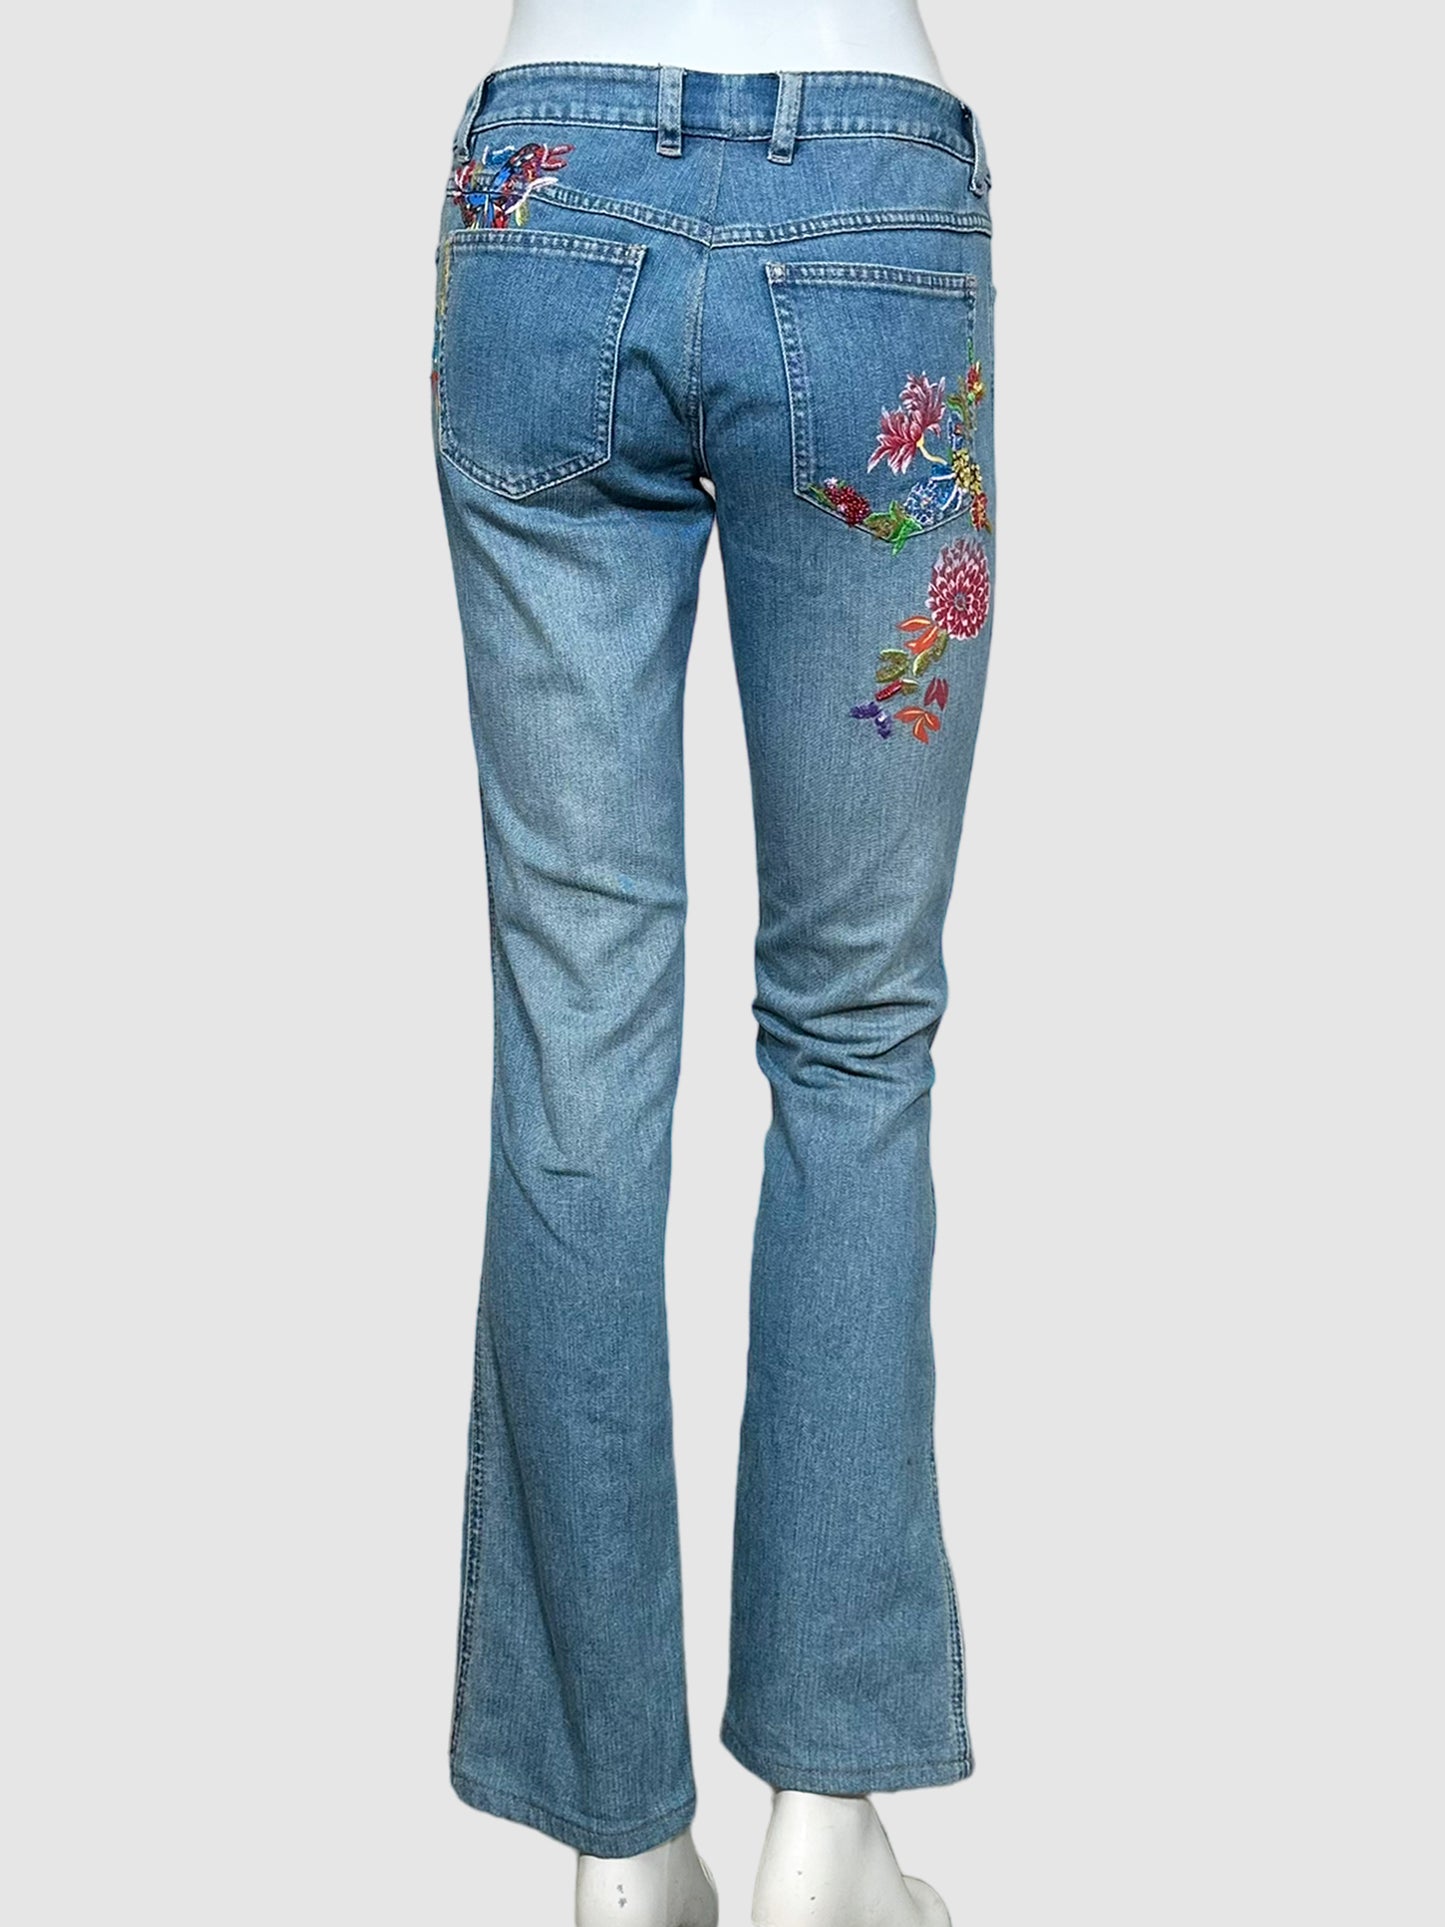 Low-Waisted Printed Jeans - Size S